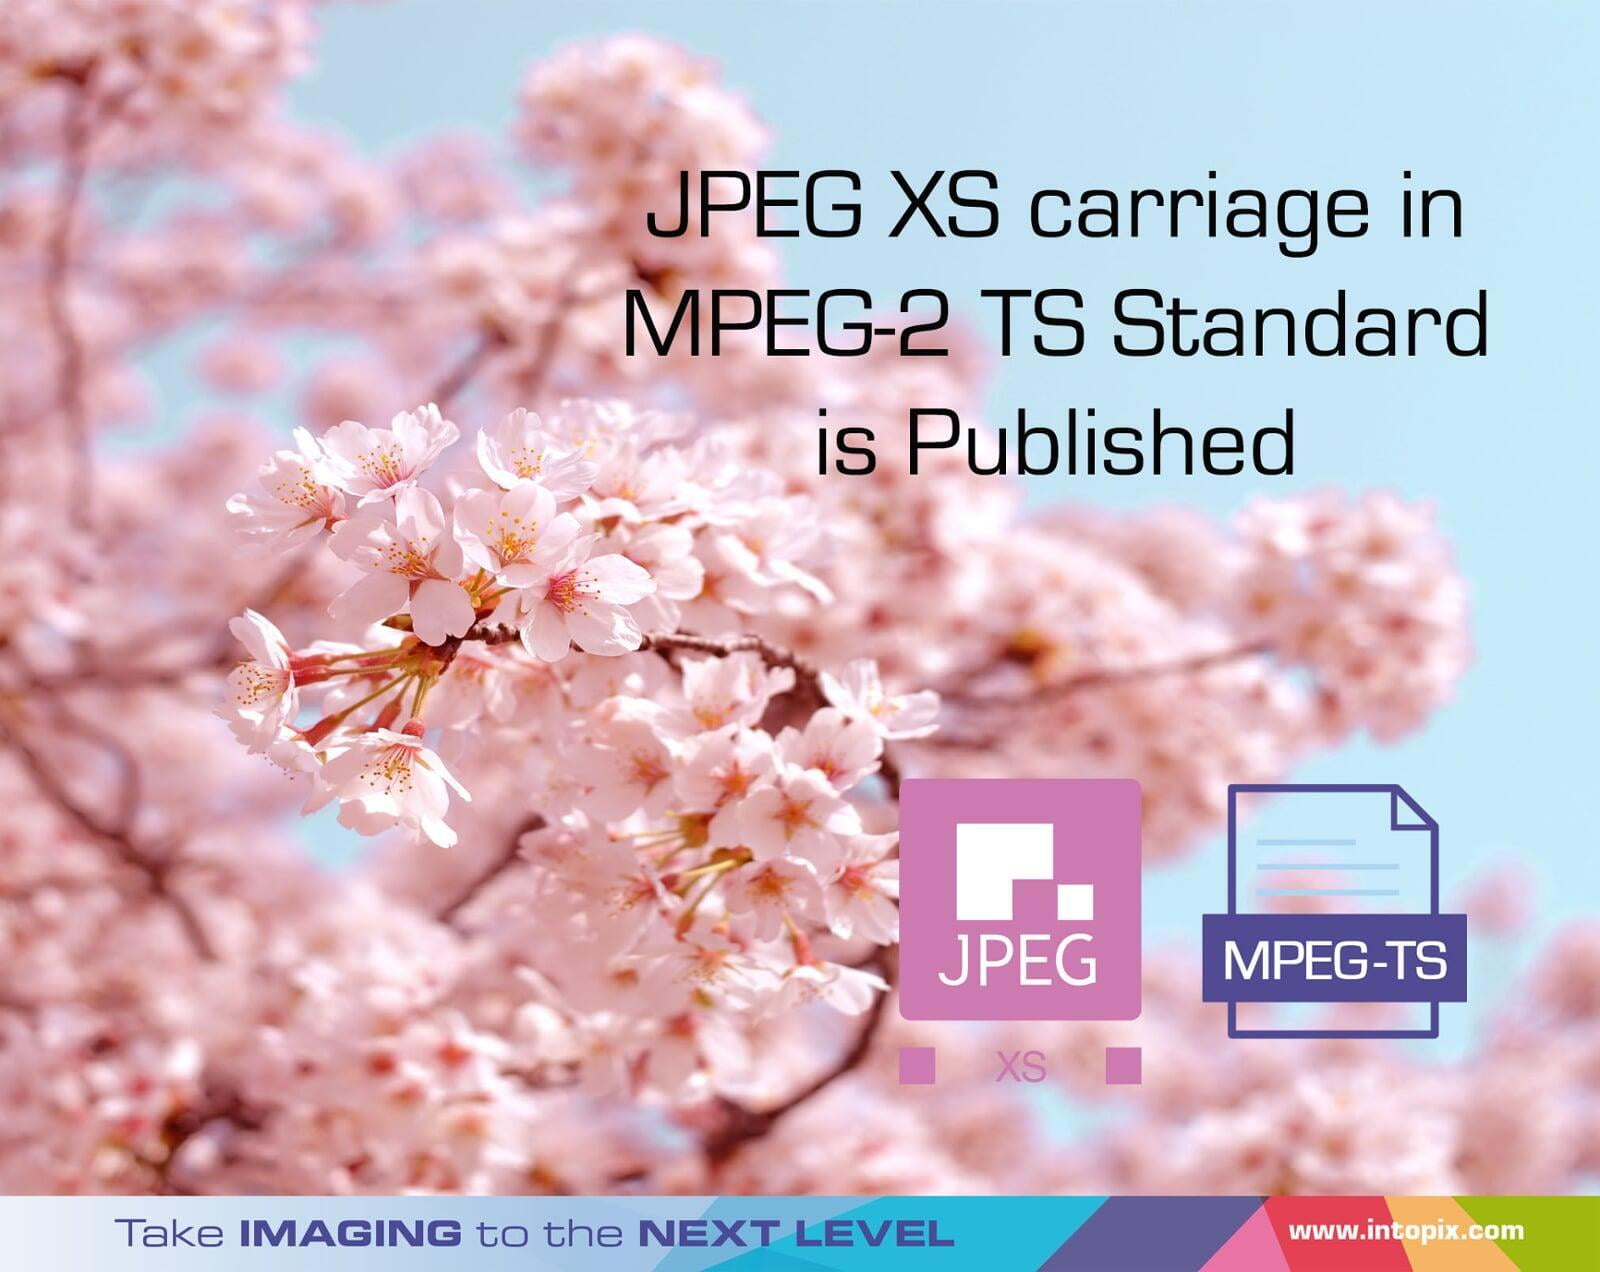 JPEG XS Carriage in MPEG-2 TS Standard is Published